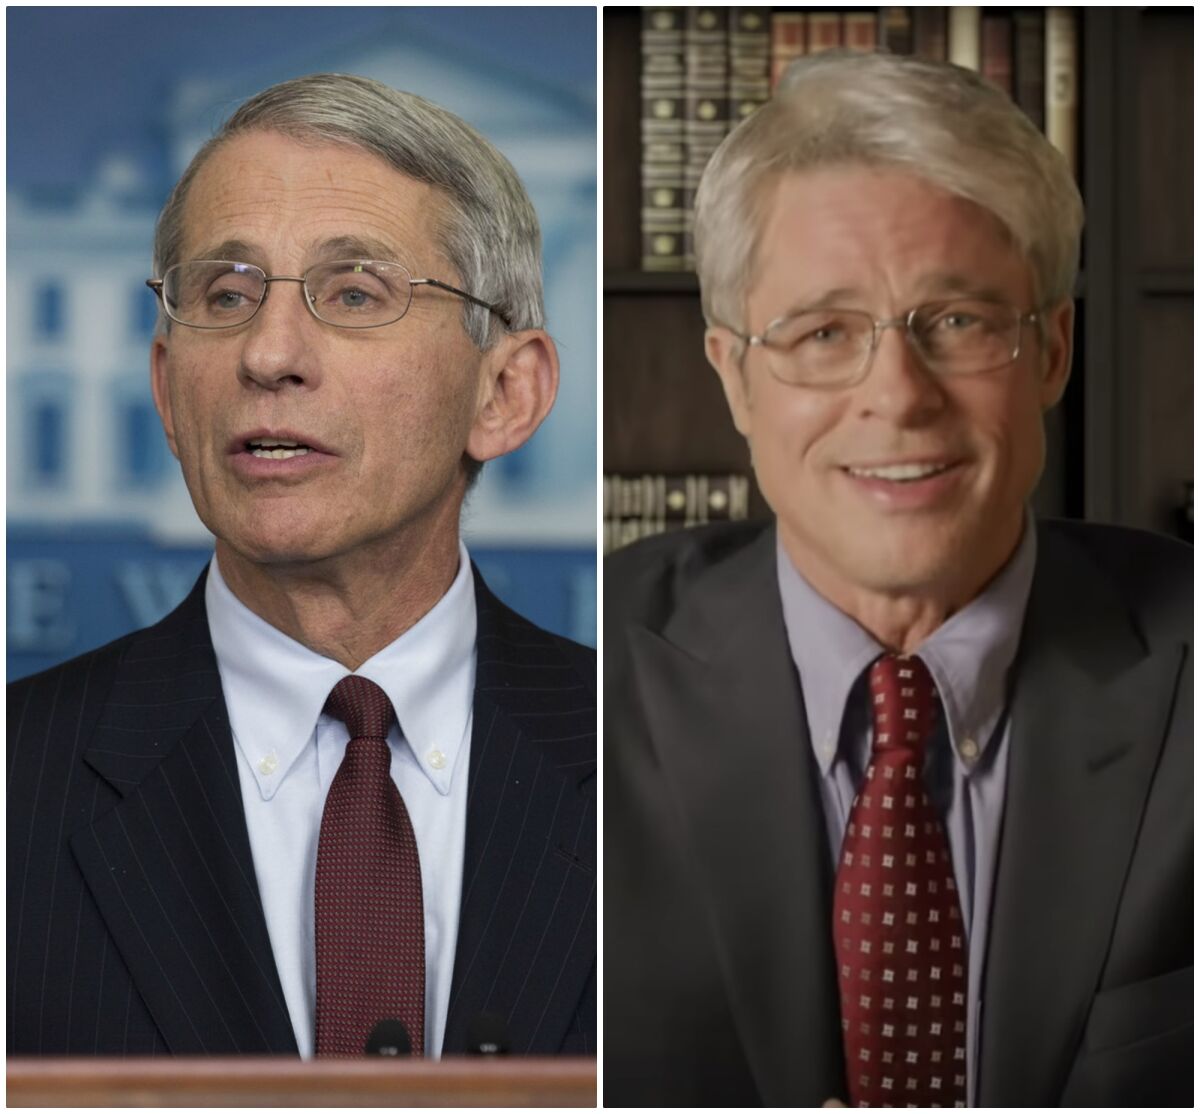 Dr. Anthony Fauci, left, was portrayed by Brad Pitt on "Saturday Night Live."